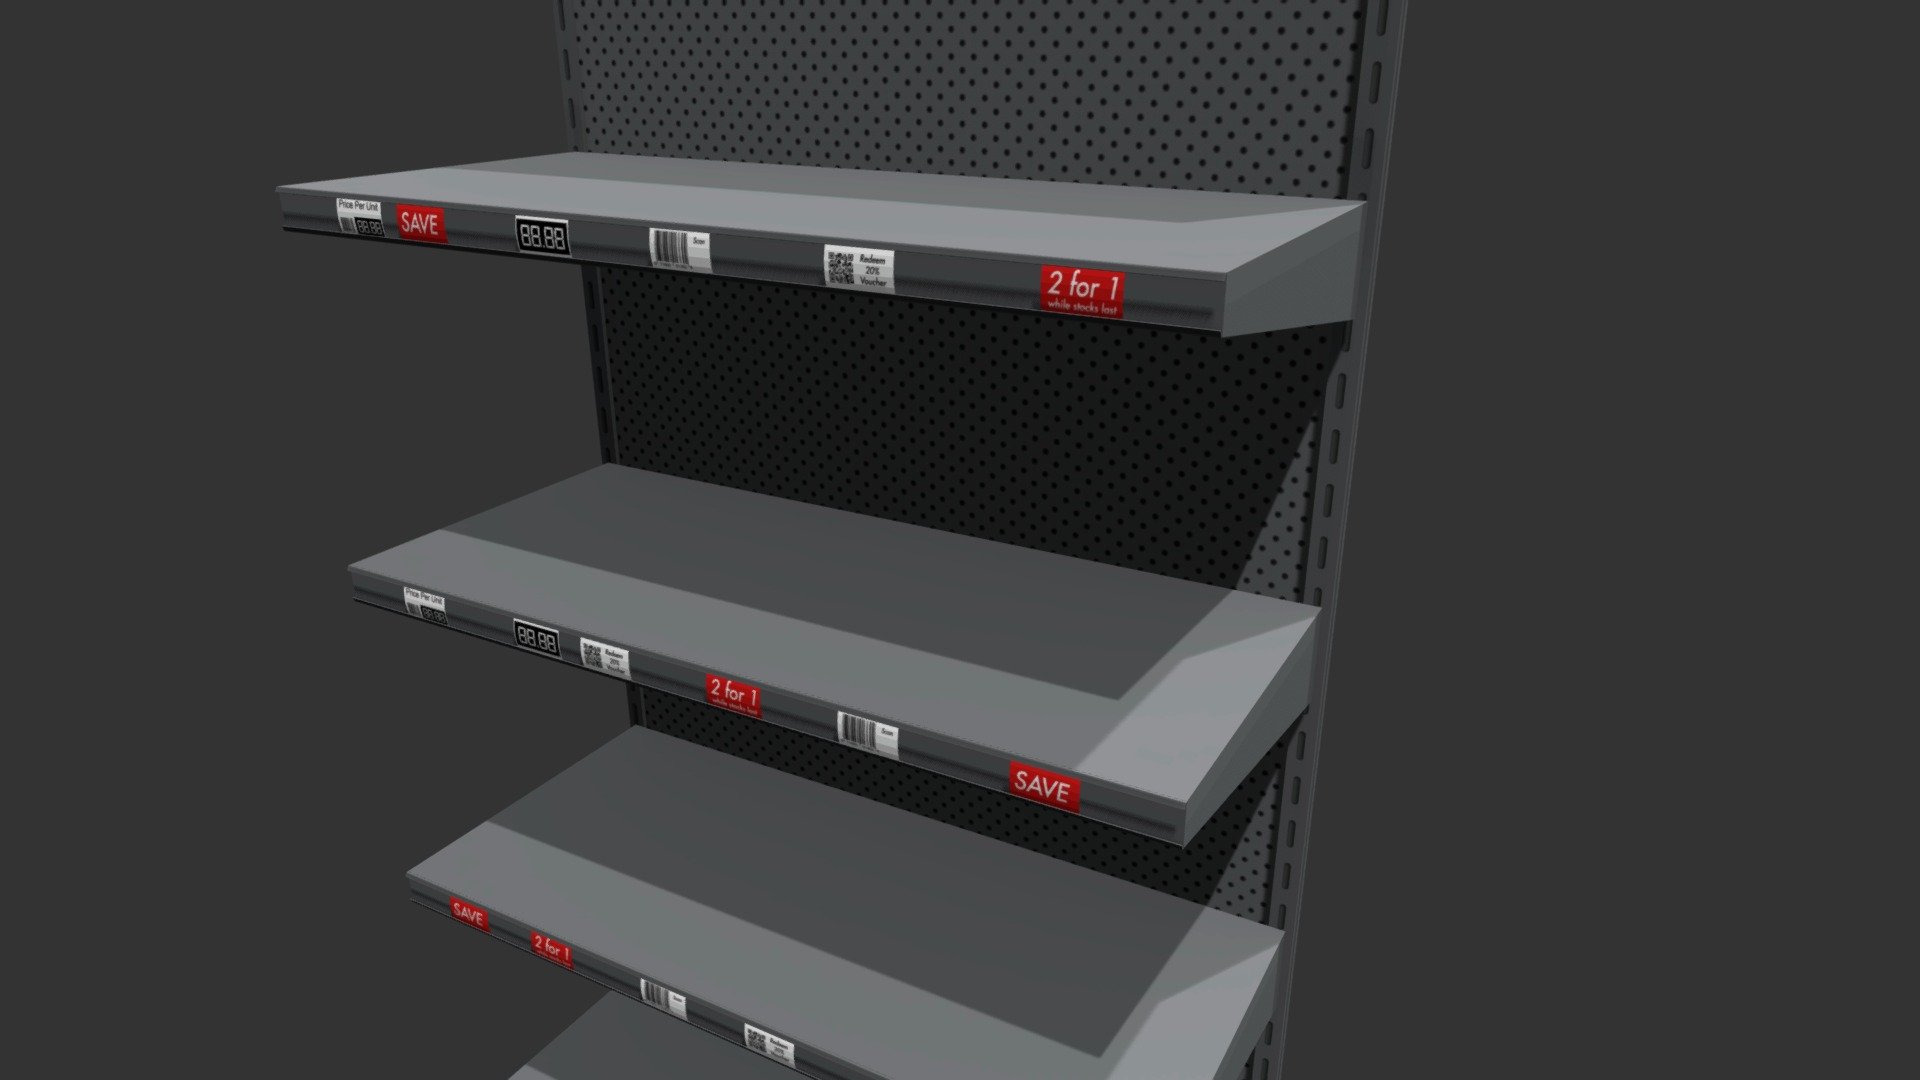 This is a simple shop shelf solution including the following components:

Shop Shelf Back board unit
Shop Shelf
Price indicator or pricer
Sale tag, Discount tag, barcode tag and coupon tag
Scale: Real world, Metric, 1:1

File formats:

Blender 2.79 / Cycles - Native
Max 2015 Scanline
FBX, exported from Max, Tested in Blender

UVW Texture coordinates: UVW Unwrapped, Mixed

Pivots: At opbject bases, snapped to front left corner of units

This can be used as a single unit or arranged in a line to form a row of shop shelve or a supermarket aisle. Build in store shop environments quickly - Shop or store shelf or shelving aisle - Buy Royalty Free 3D model by 3D Content Online (@hknoblauch) 3d model